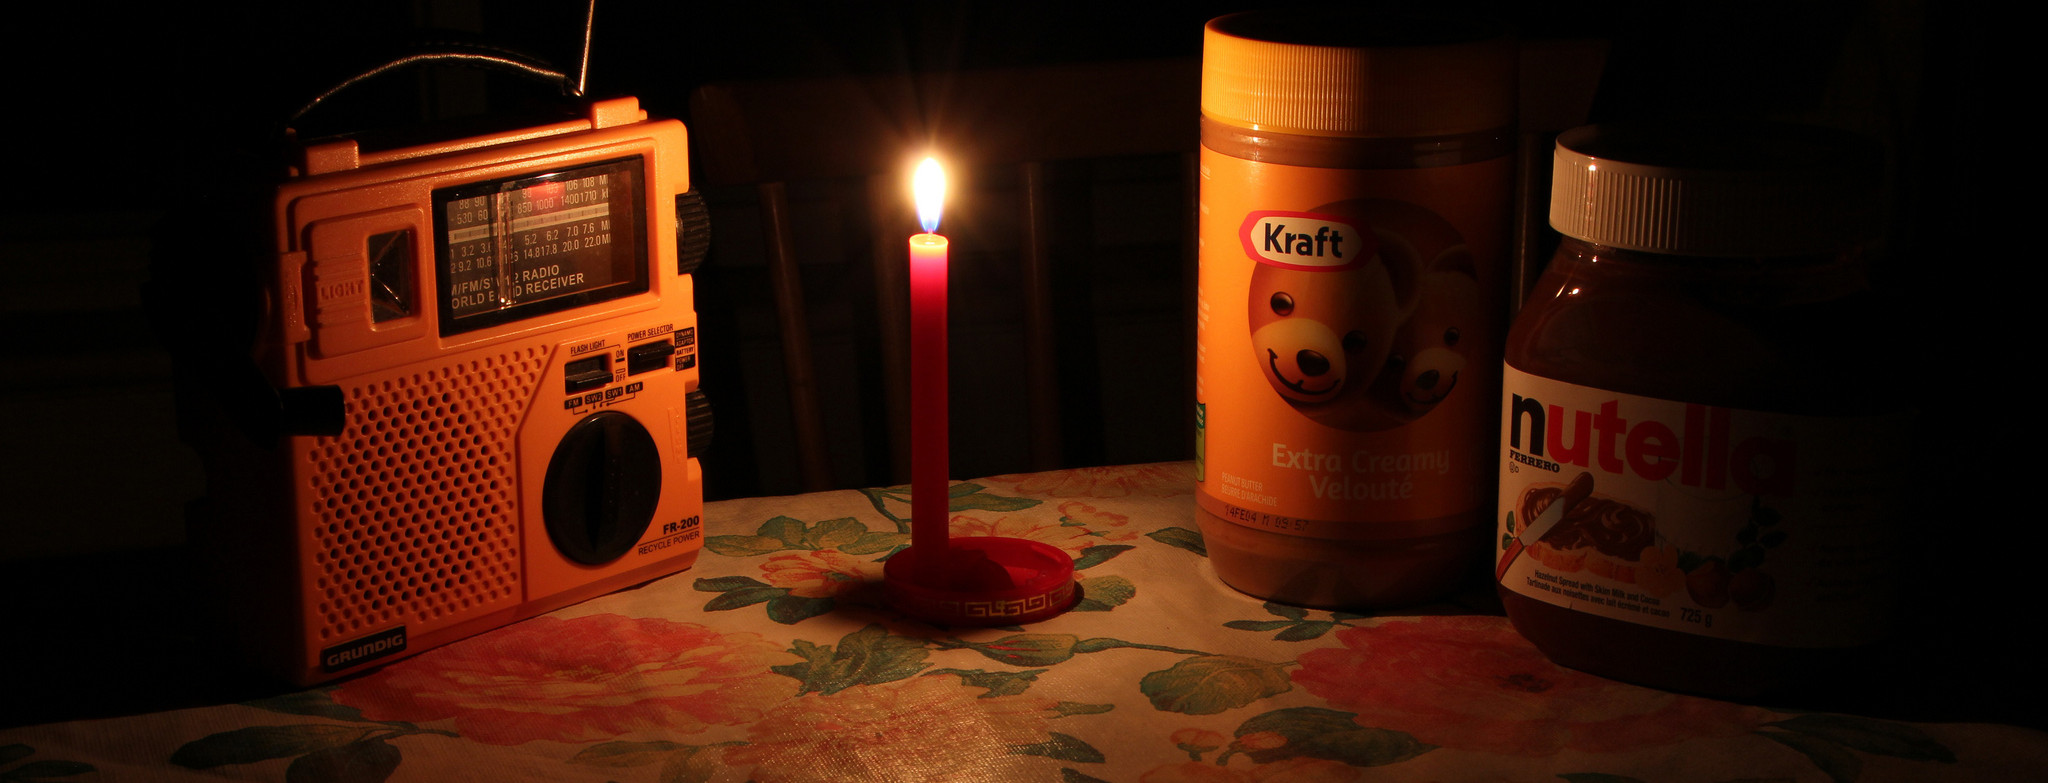 Power Outage Kit with Emergency Lantern for a Blackout at Home